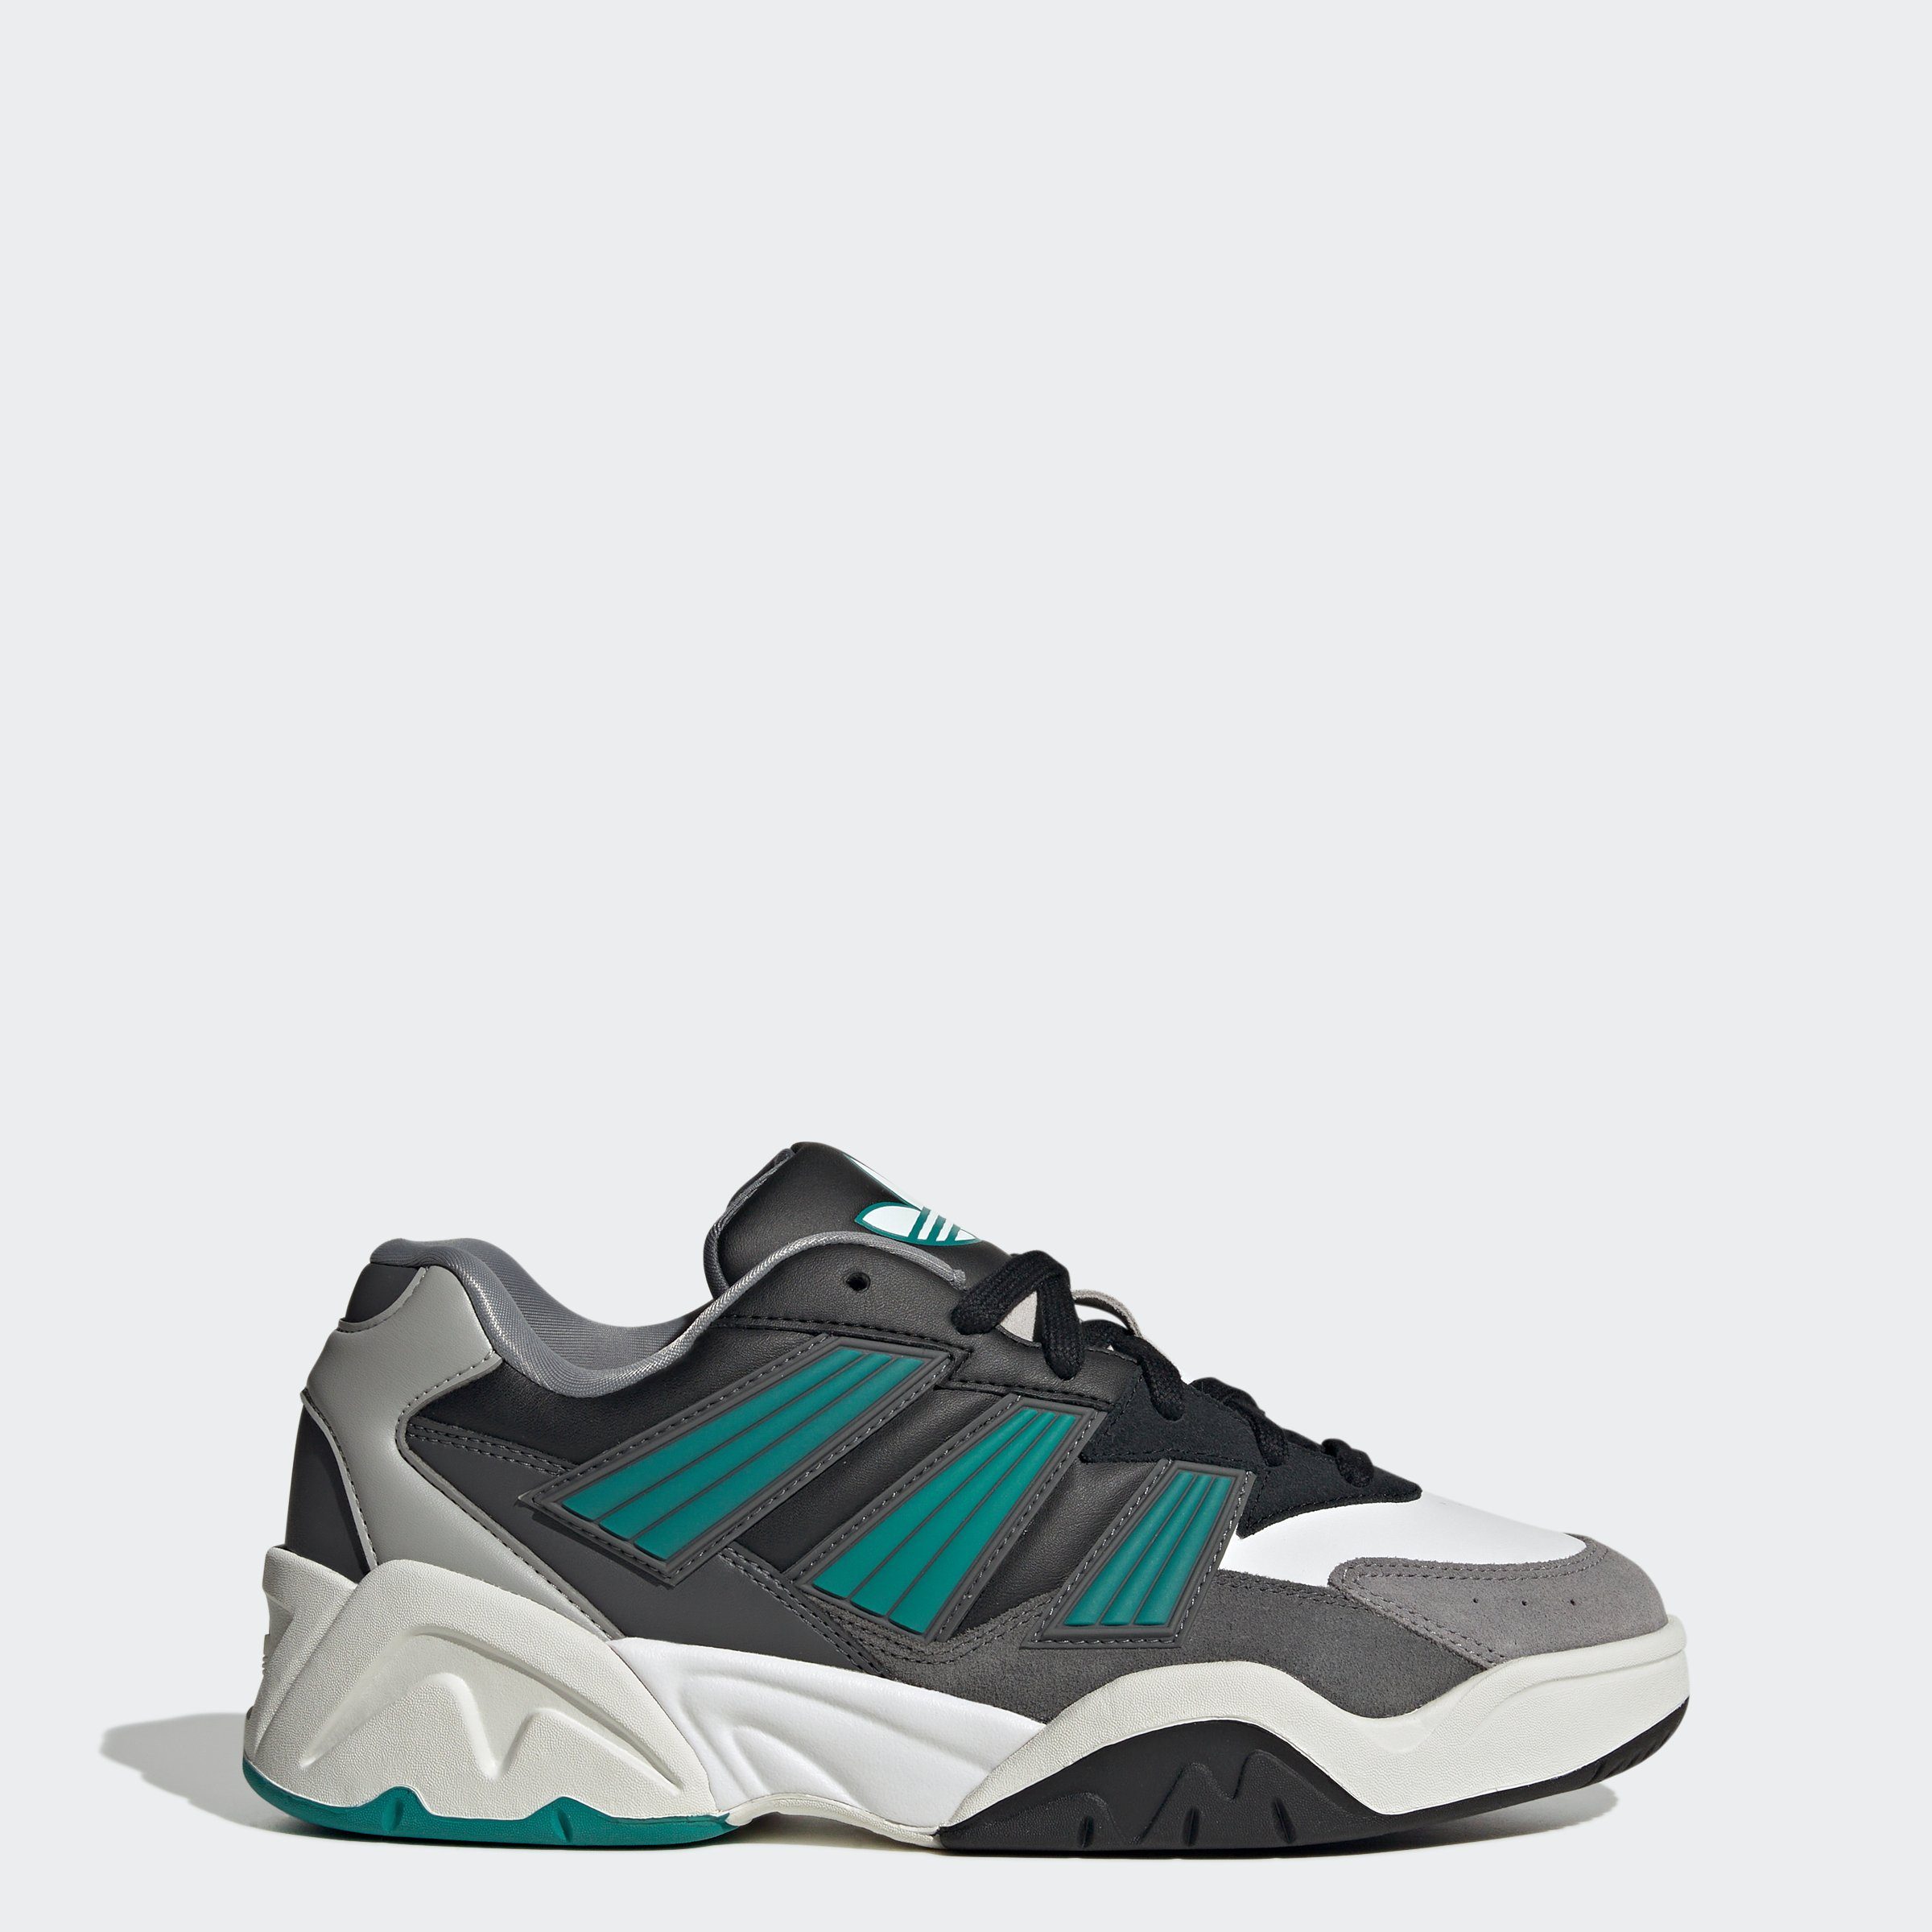 Sneaker / White COURT Originals White MAGNETIC Green Eqt adidas Cloud Crystal /